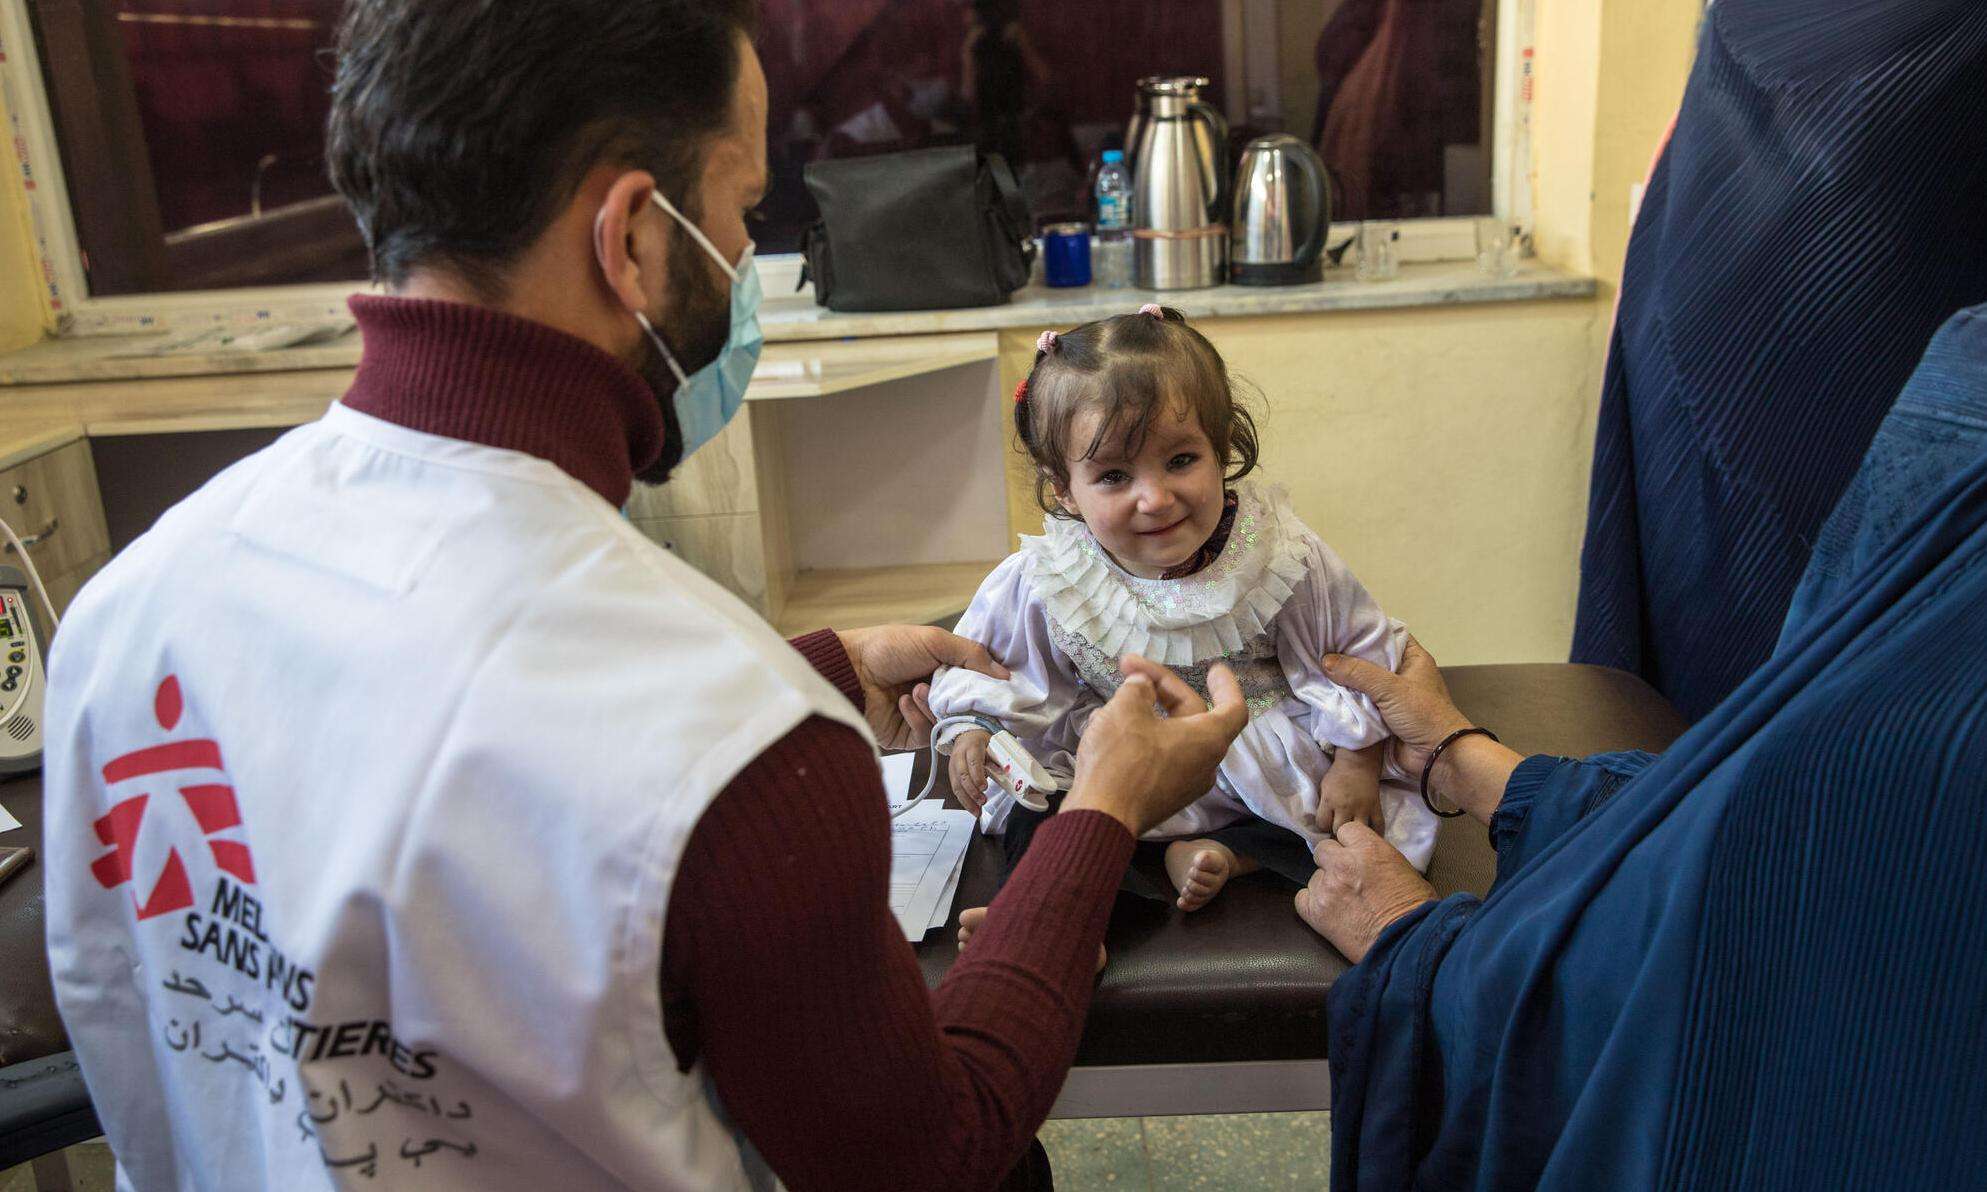 A small child is checked by an MSF staff member with her mother standing beside her in Afghanistan.